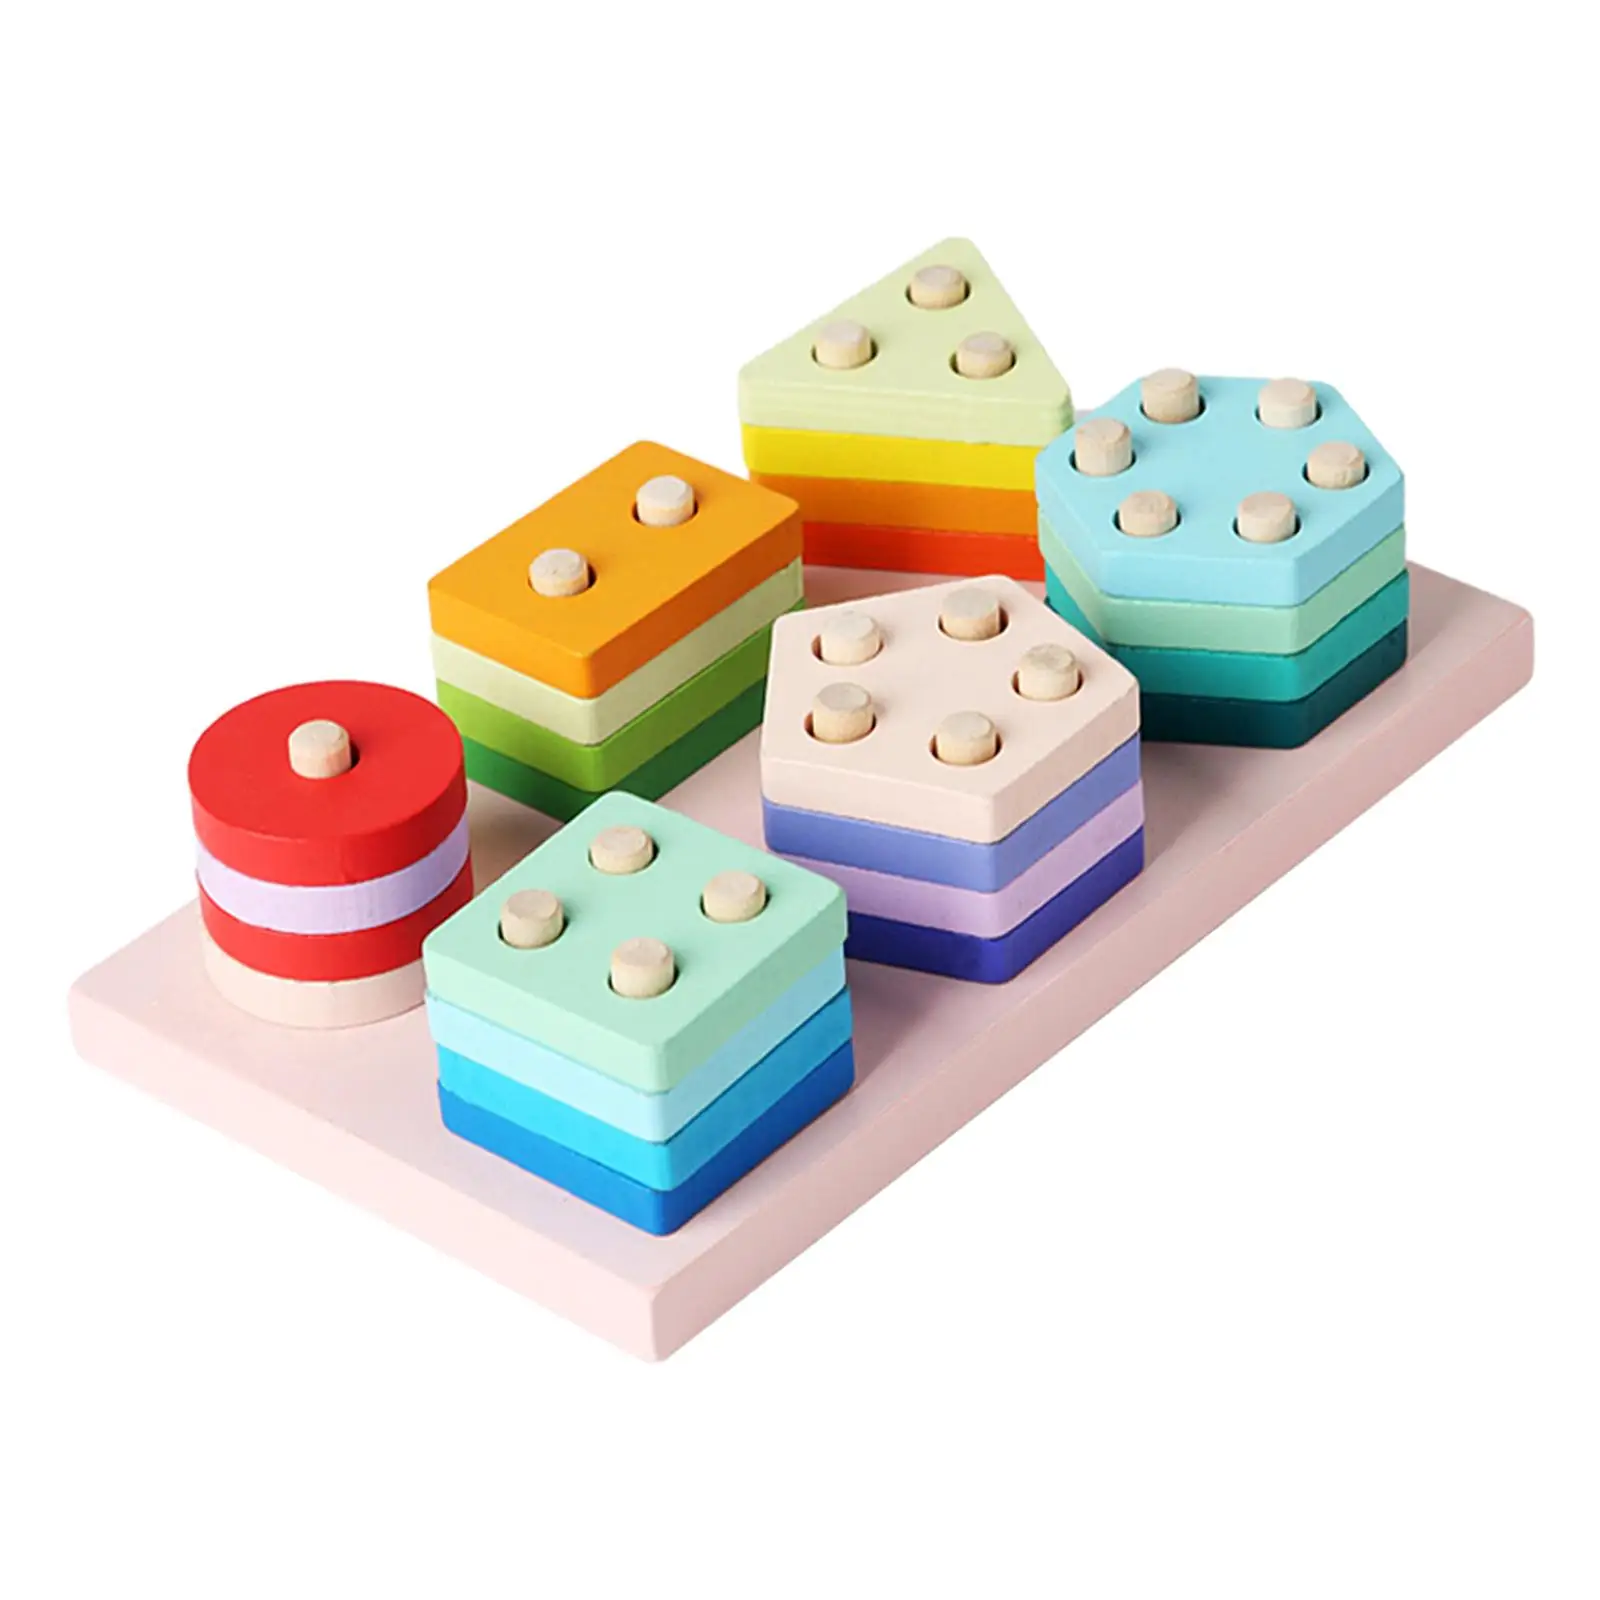 Wooden Sorting Matching Puzzle Bright Color Educational Toy Hand Eye Coordibation Shape Color Recognition for Kids Boys Girls